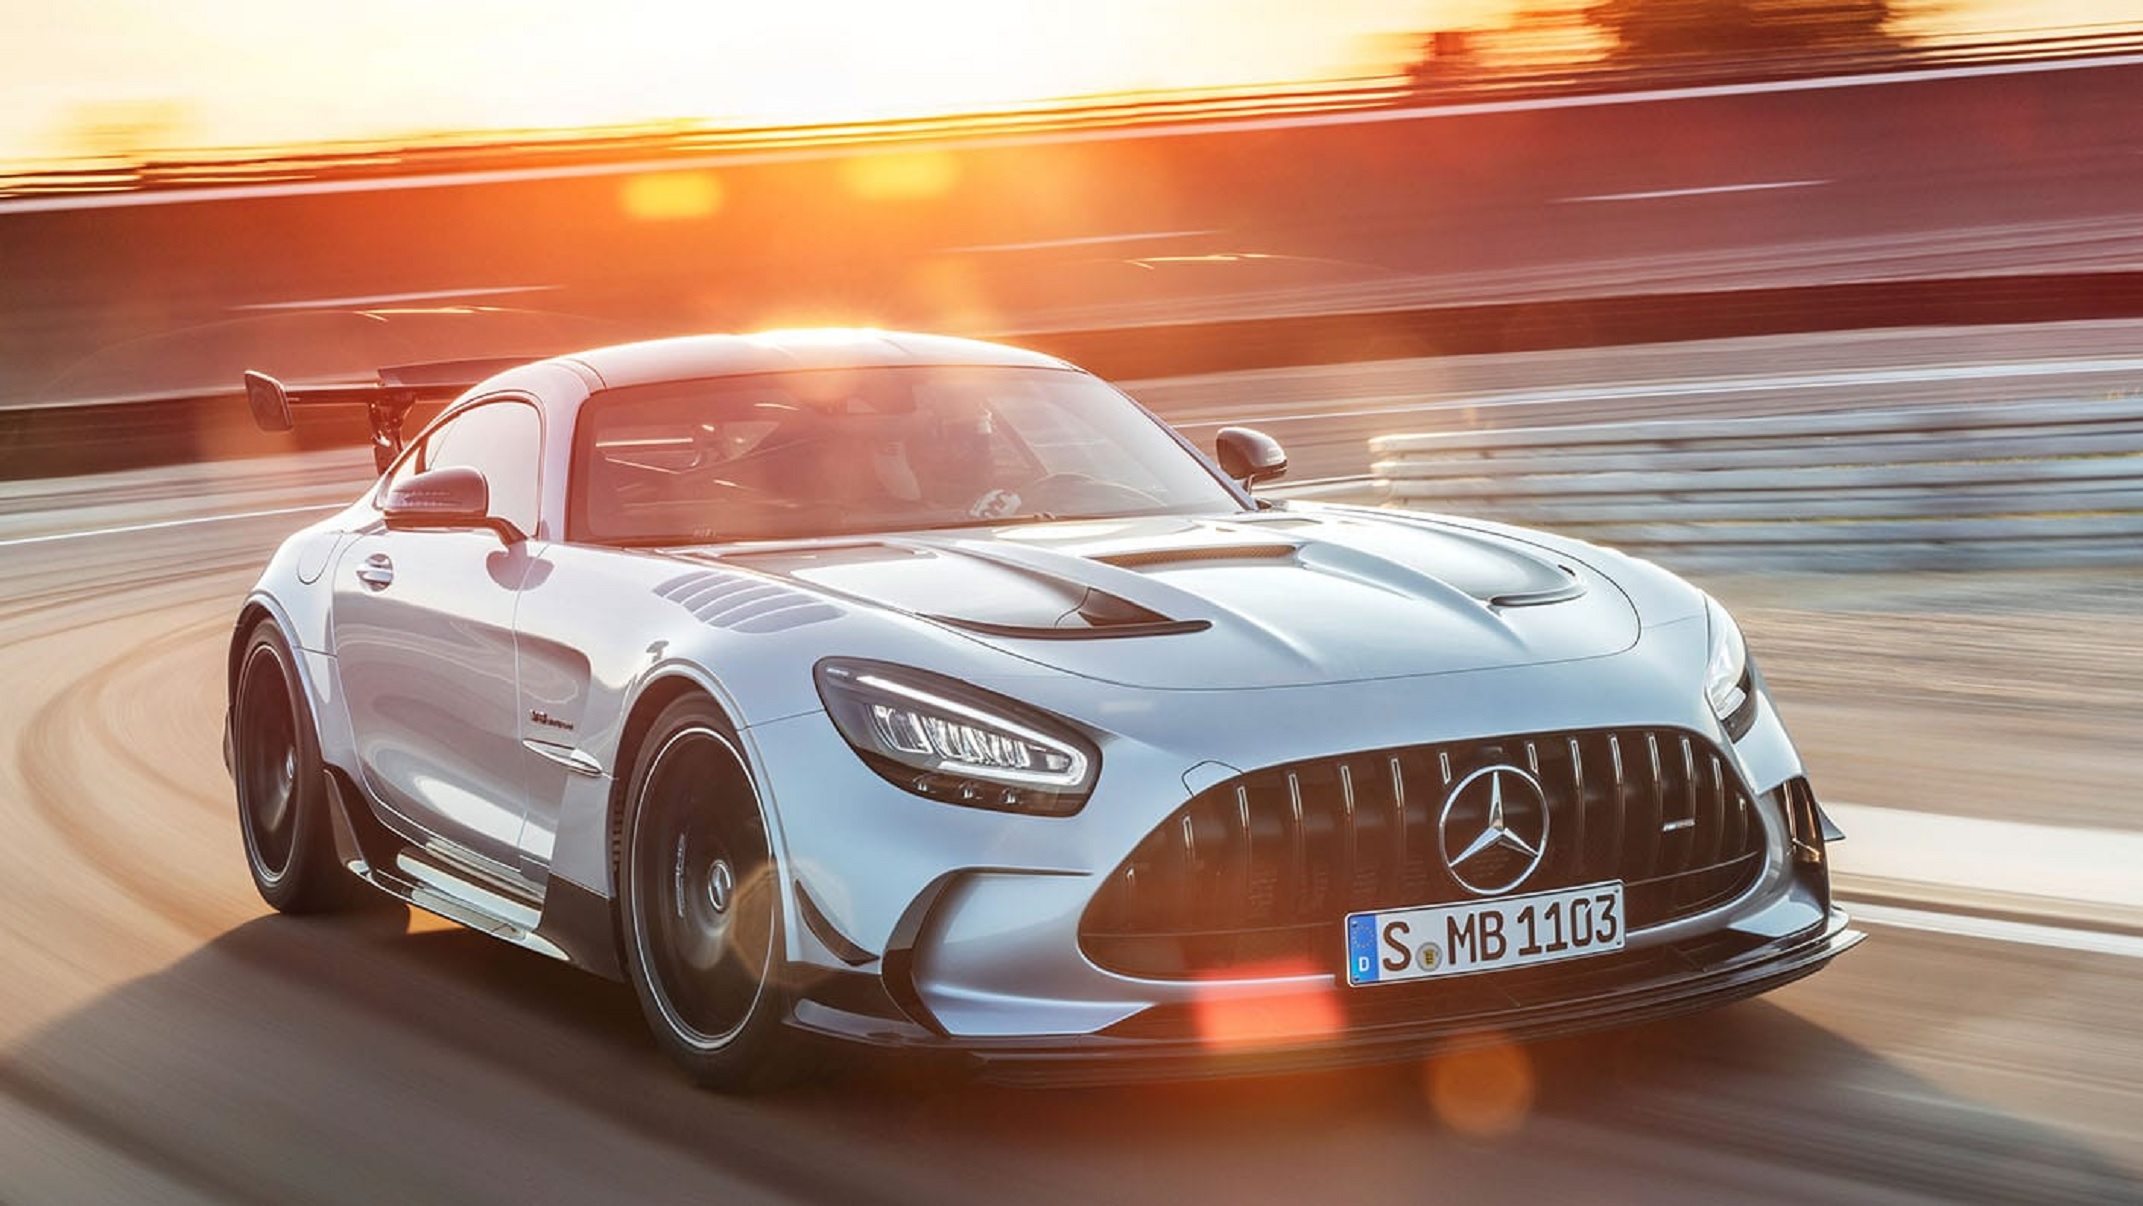 The 2021 Mercedes AMG GT Black Series Is a 720 Hp Road Legal Racer